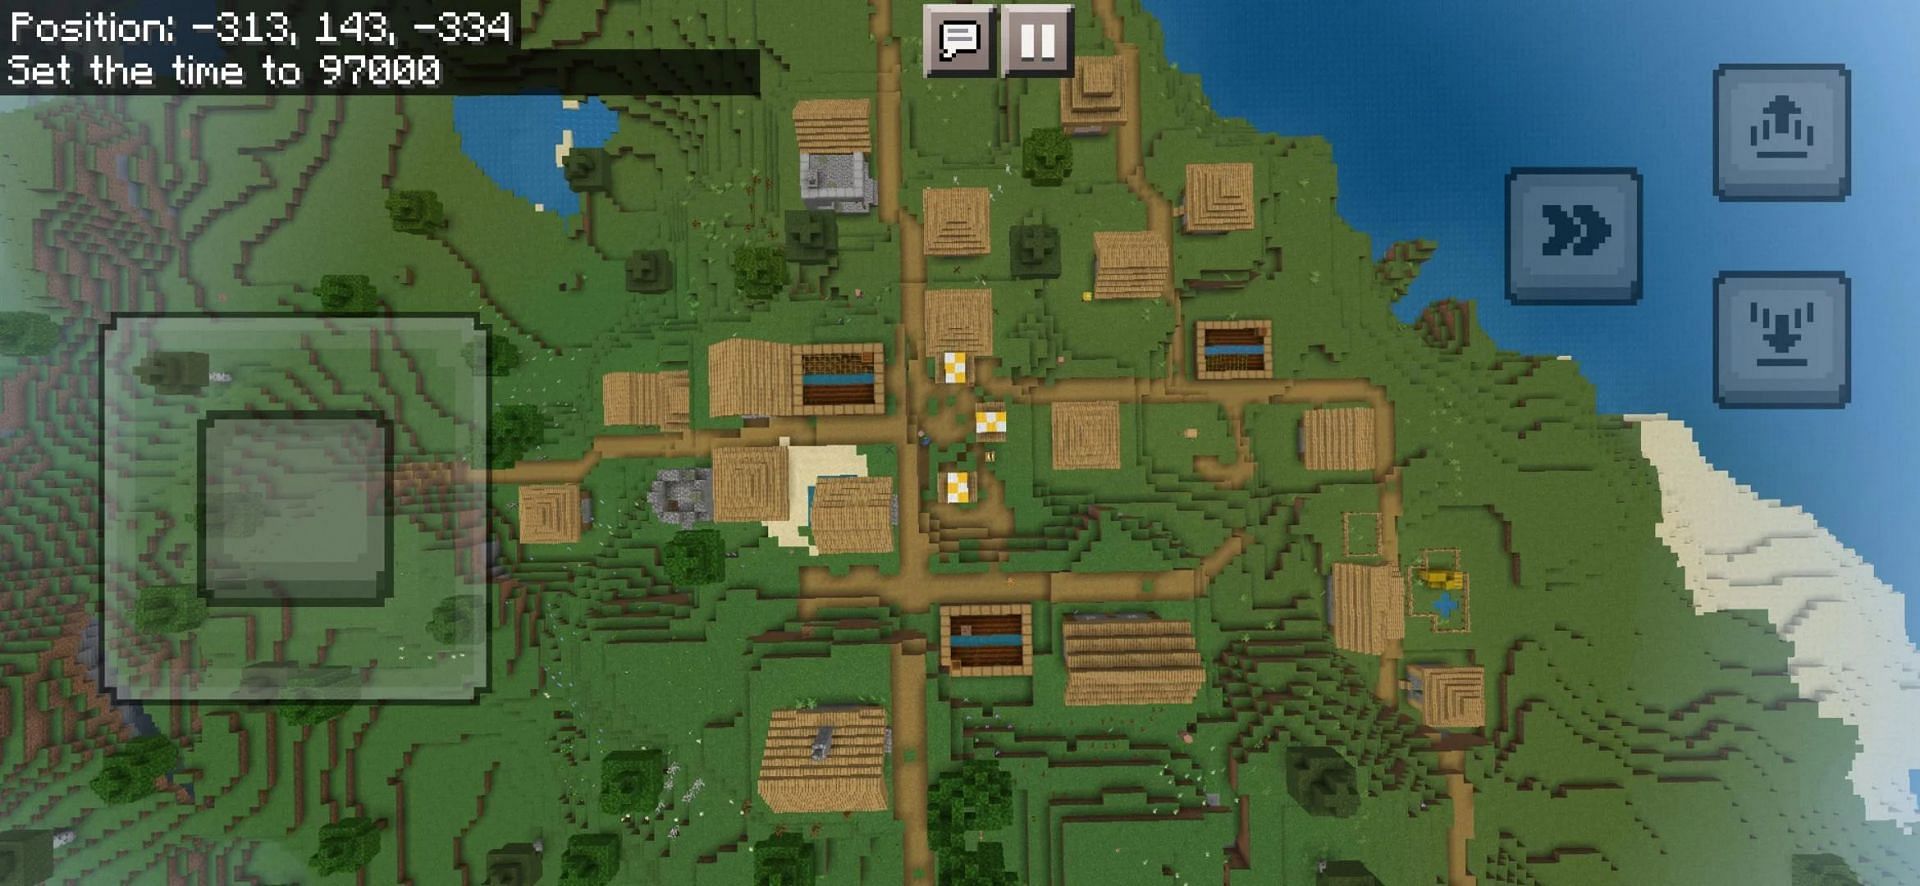 Top view of the village at spawn (Image via u/sandcolonel on Reddit)